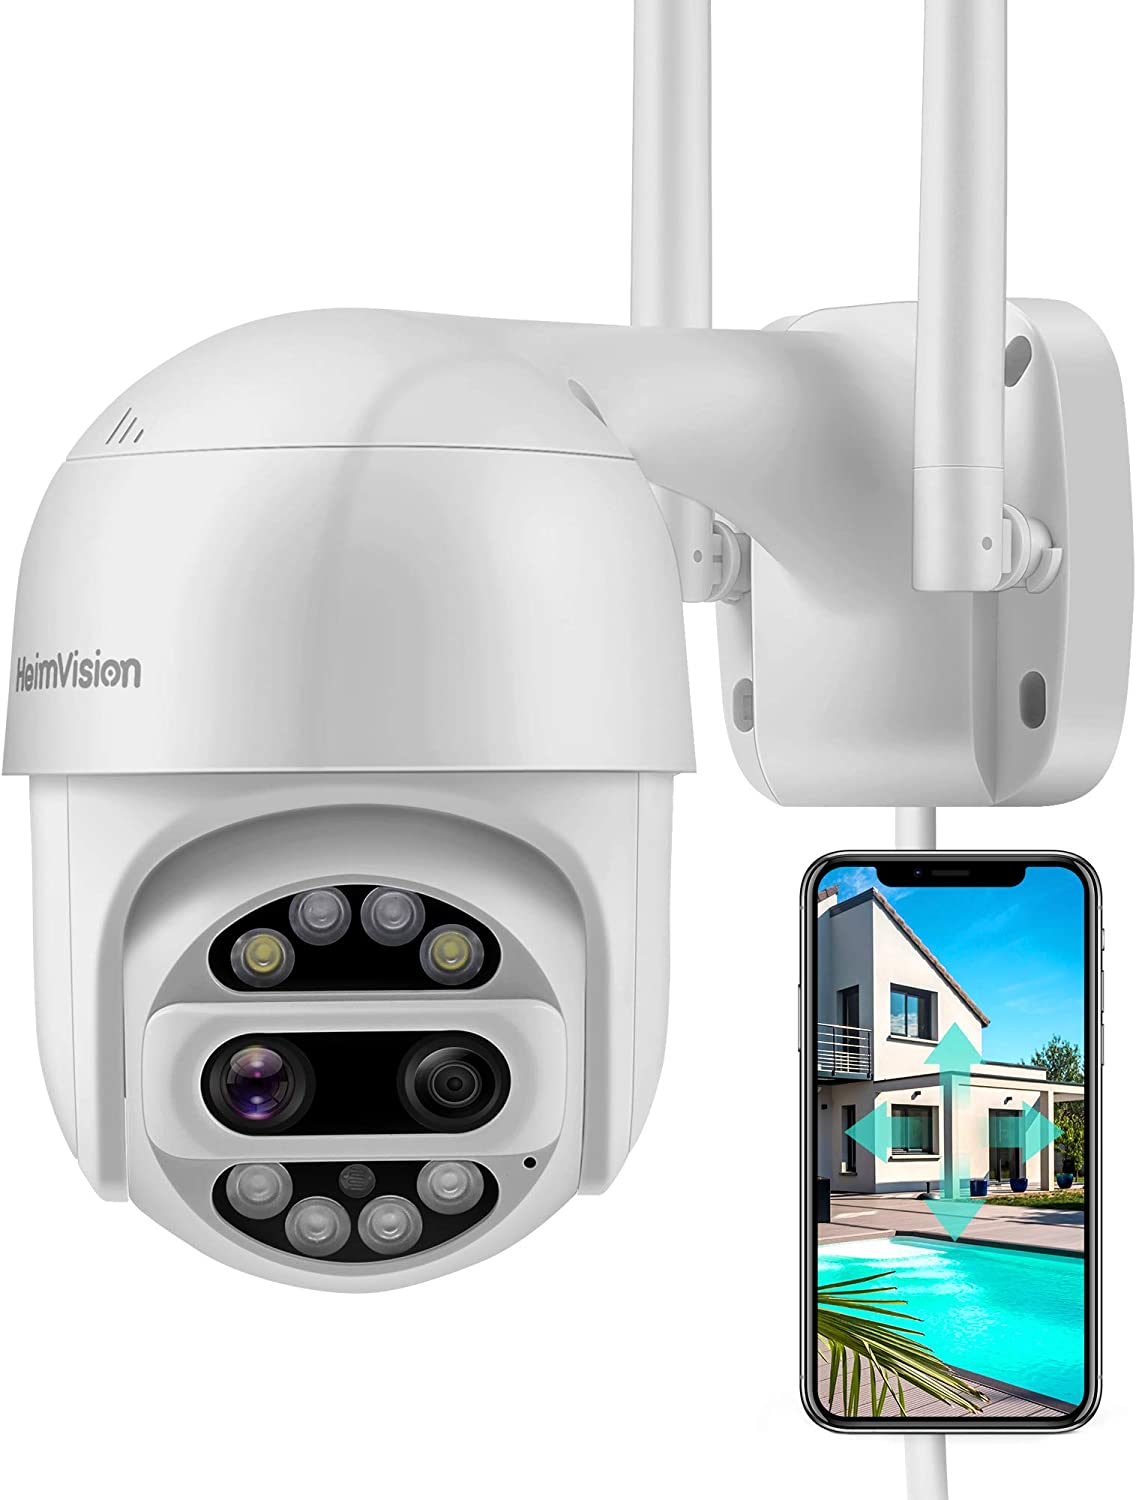 HeimVision HM612 PTZ Security Camera Outdoor. - e4cents